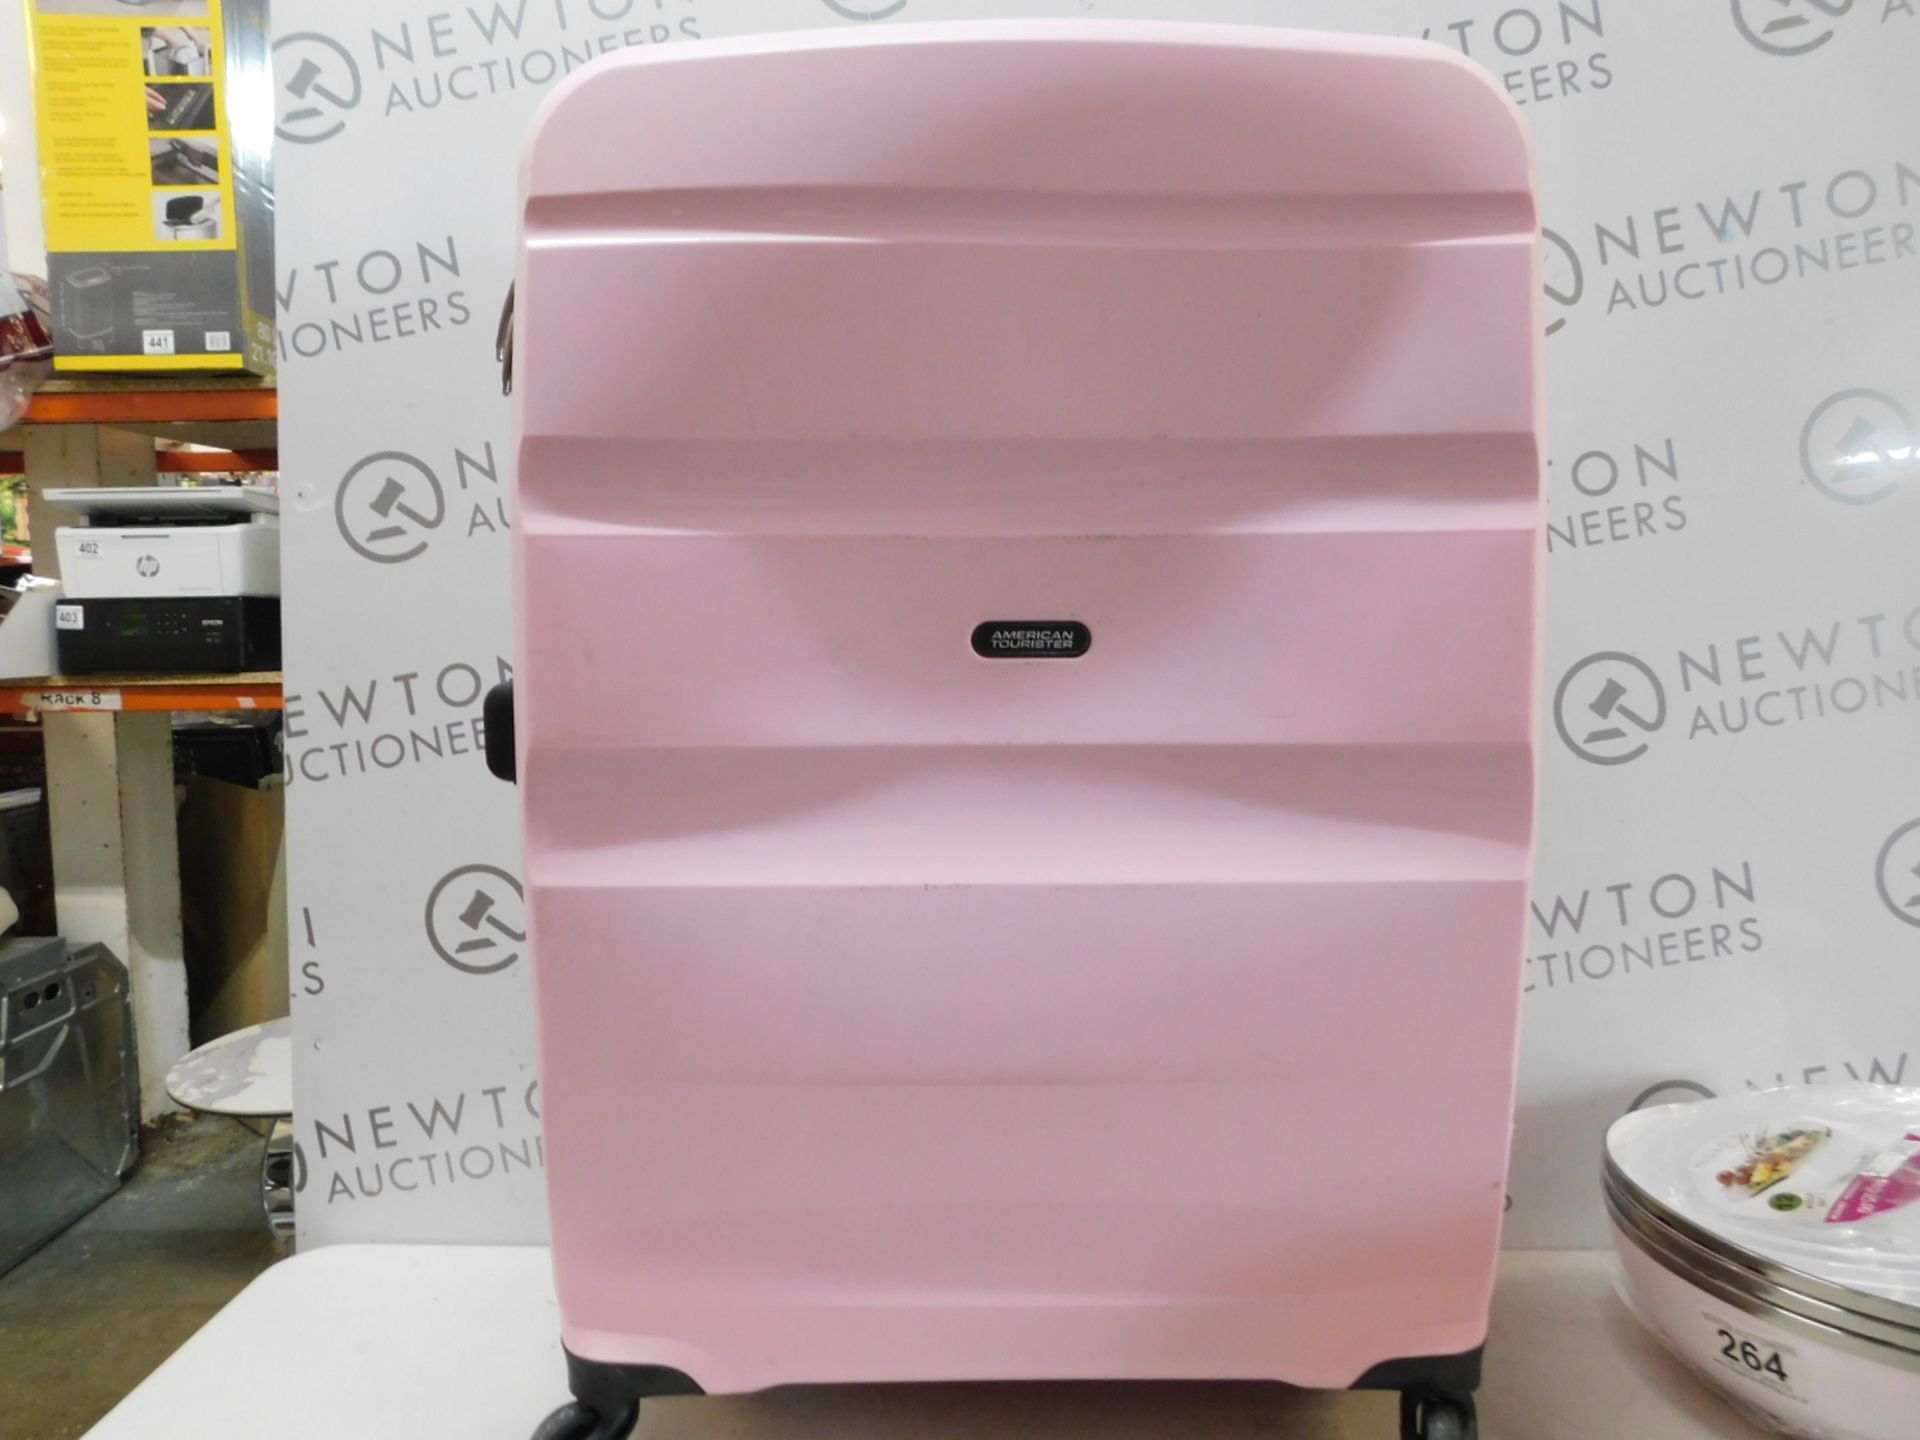 1 AMERICAN TOURISTER COTTON CANDY PINK COMBI-LOCK HARDSIDE PROTECTION LUGGAGE CASE RRP £149.99